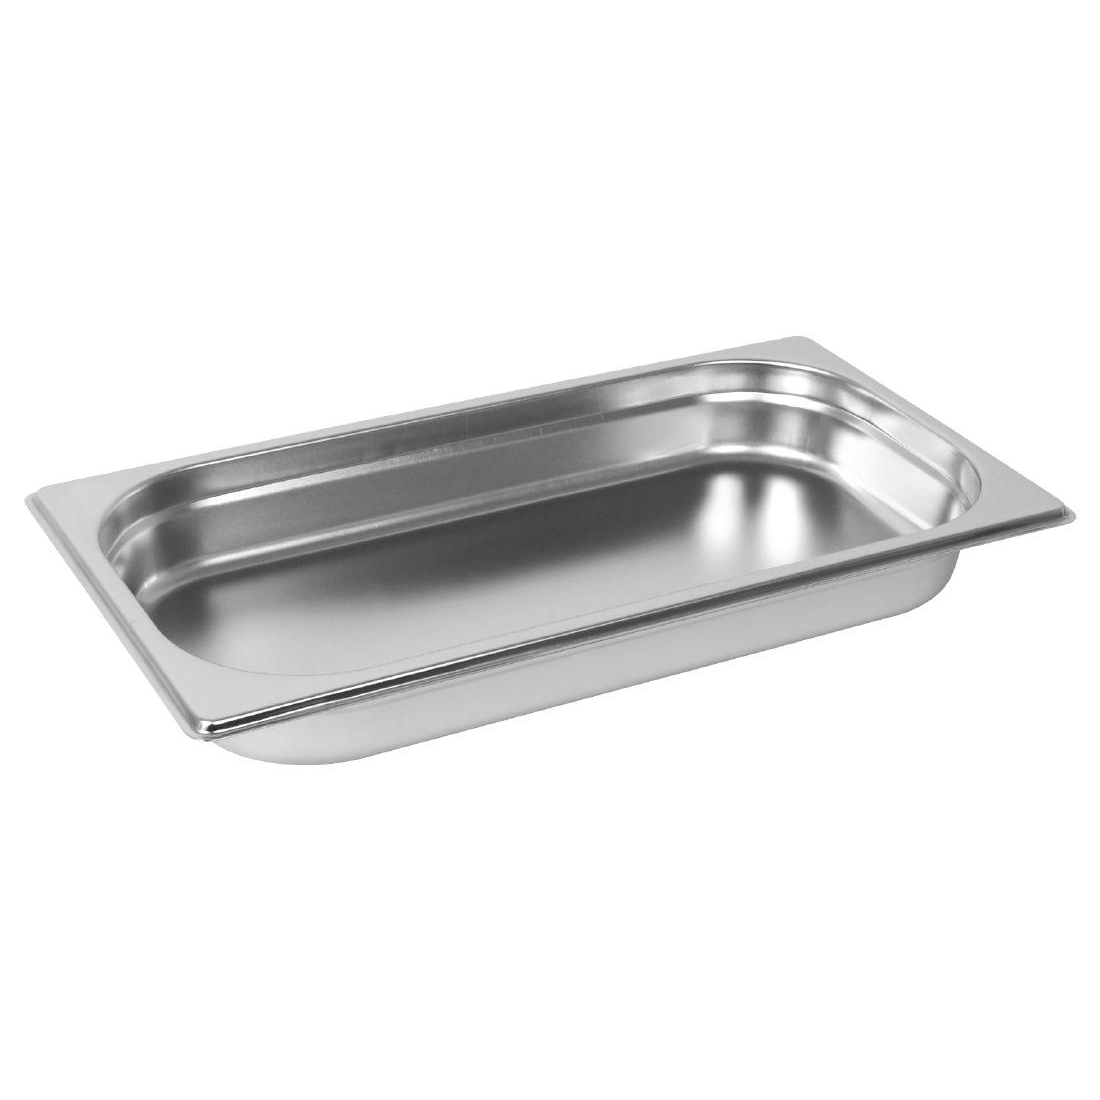 Vogue Stainless Steel GN 1/3 Pan 40mm